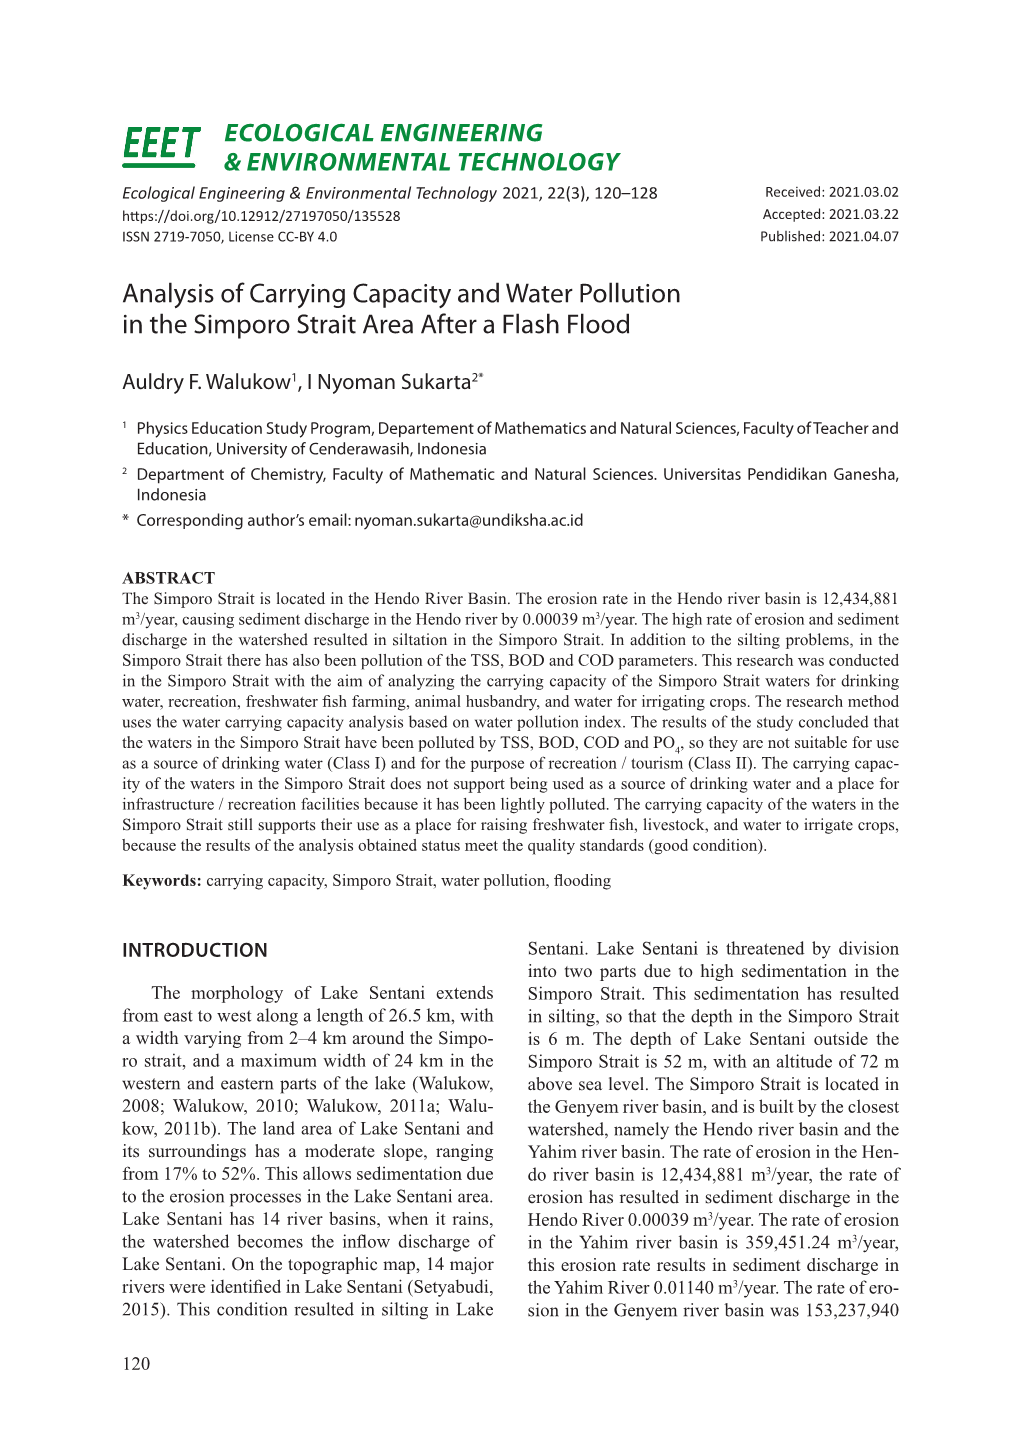 Analysis of Carrying Capacity and Water Pollution in the Simporo Strait Area After a Flash Flood